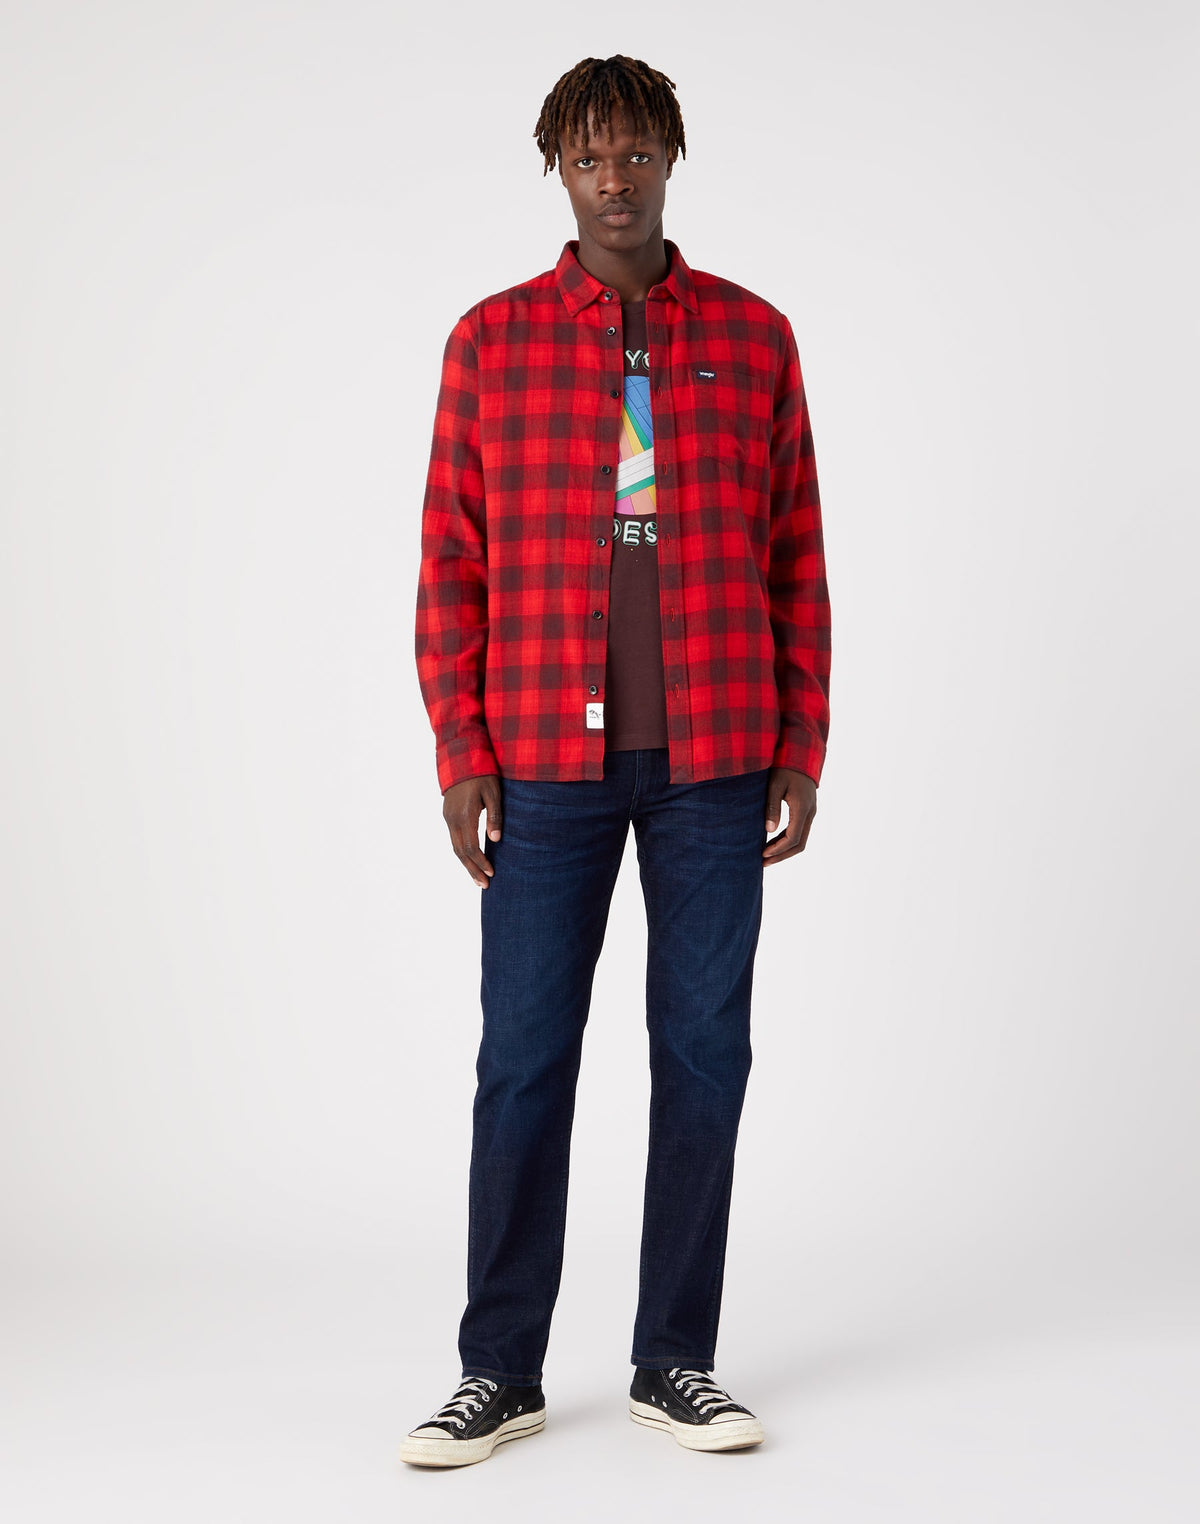 One Pocket Shirt in Rhubarb Red